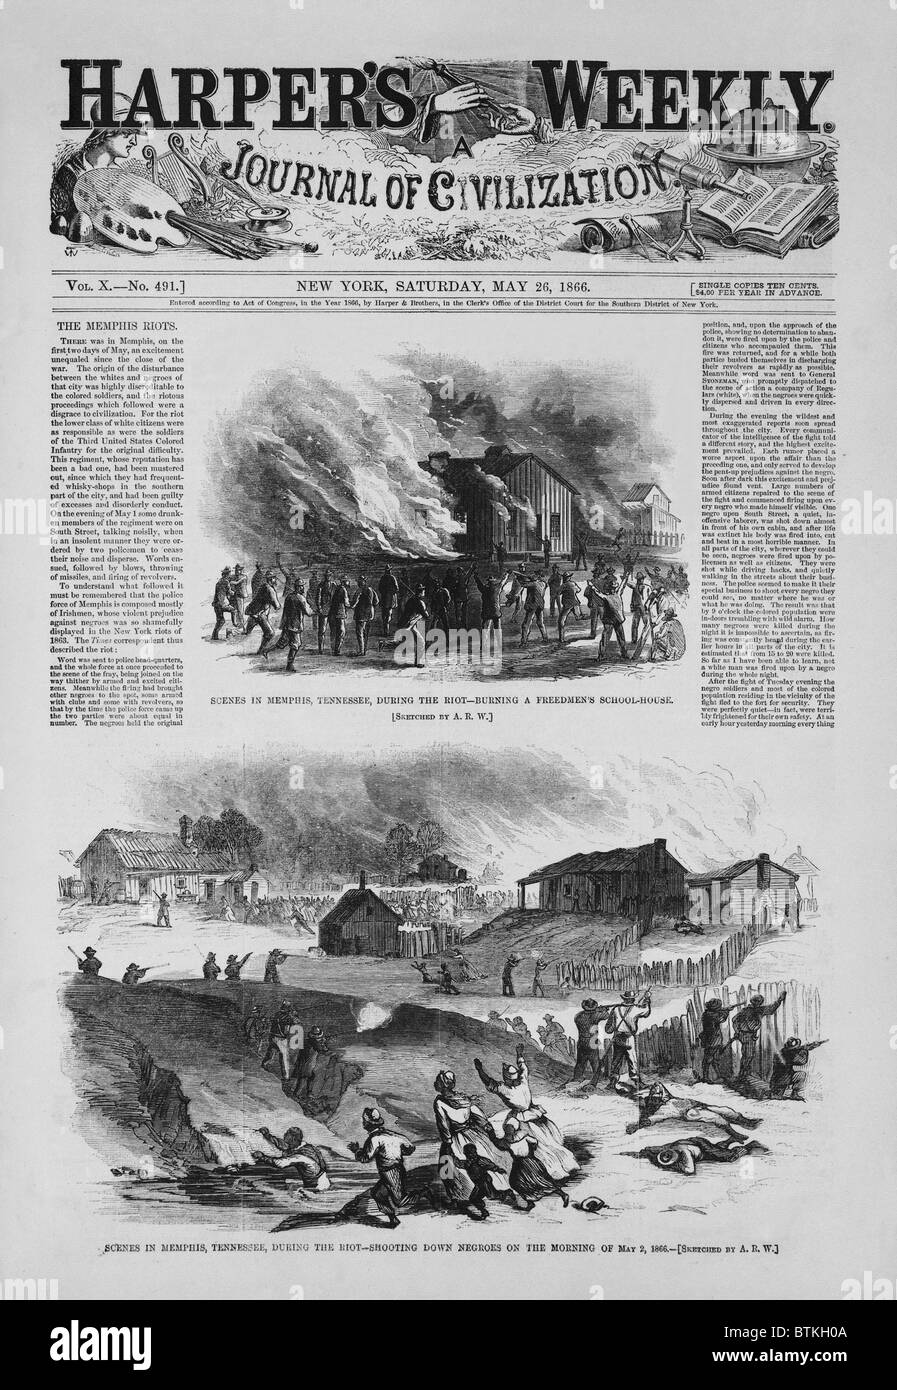 Front Page of a newspaper reports about a race riot in Memphis, Tennessee, May 2, 1866. For two days, white mobs, attacked the freedmen's neighborhoods, killing 46 African Americans, assaulting and wounding many more. Stock Photo